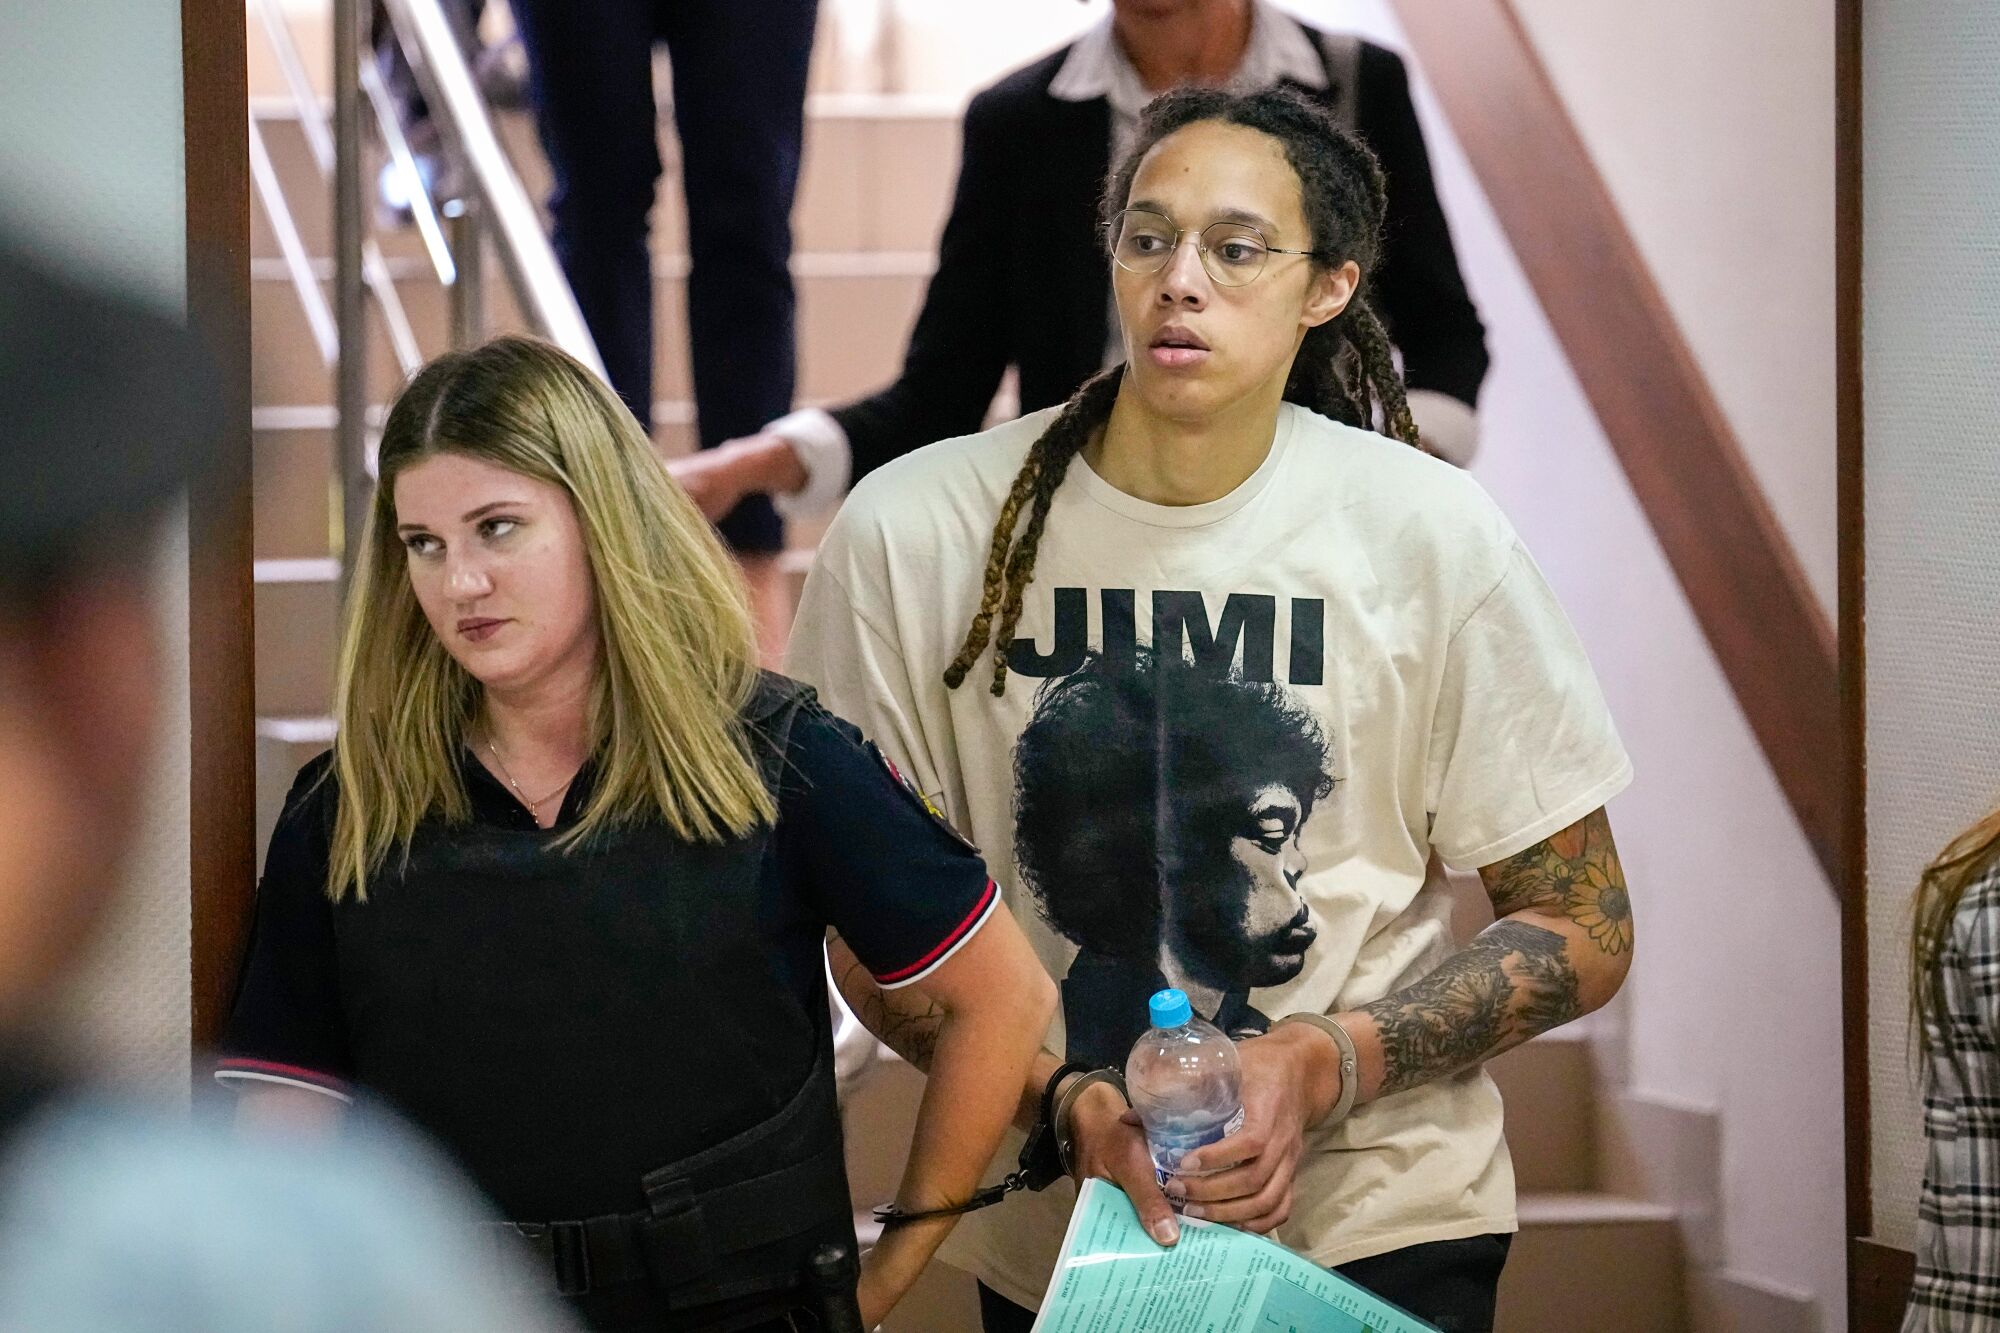 WNBA star and two-time Olympic gold medalist Brittney Griner is escorted to a courtroom in Moscow.